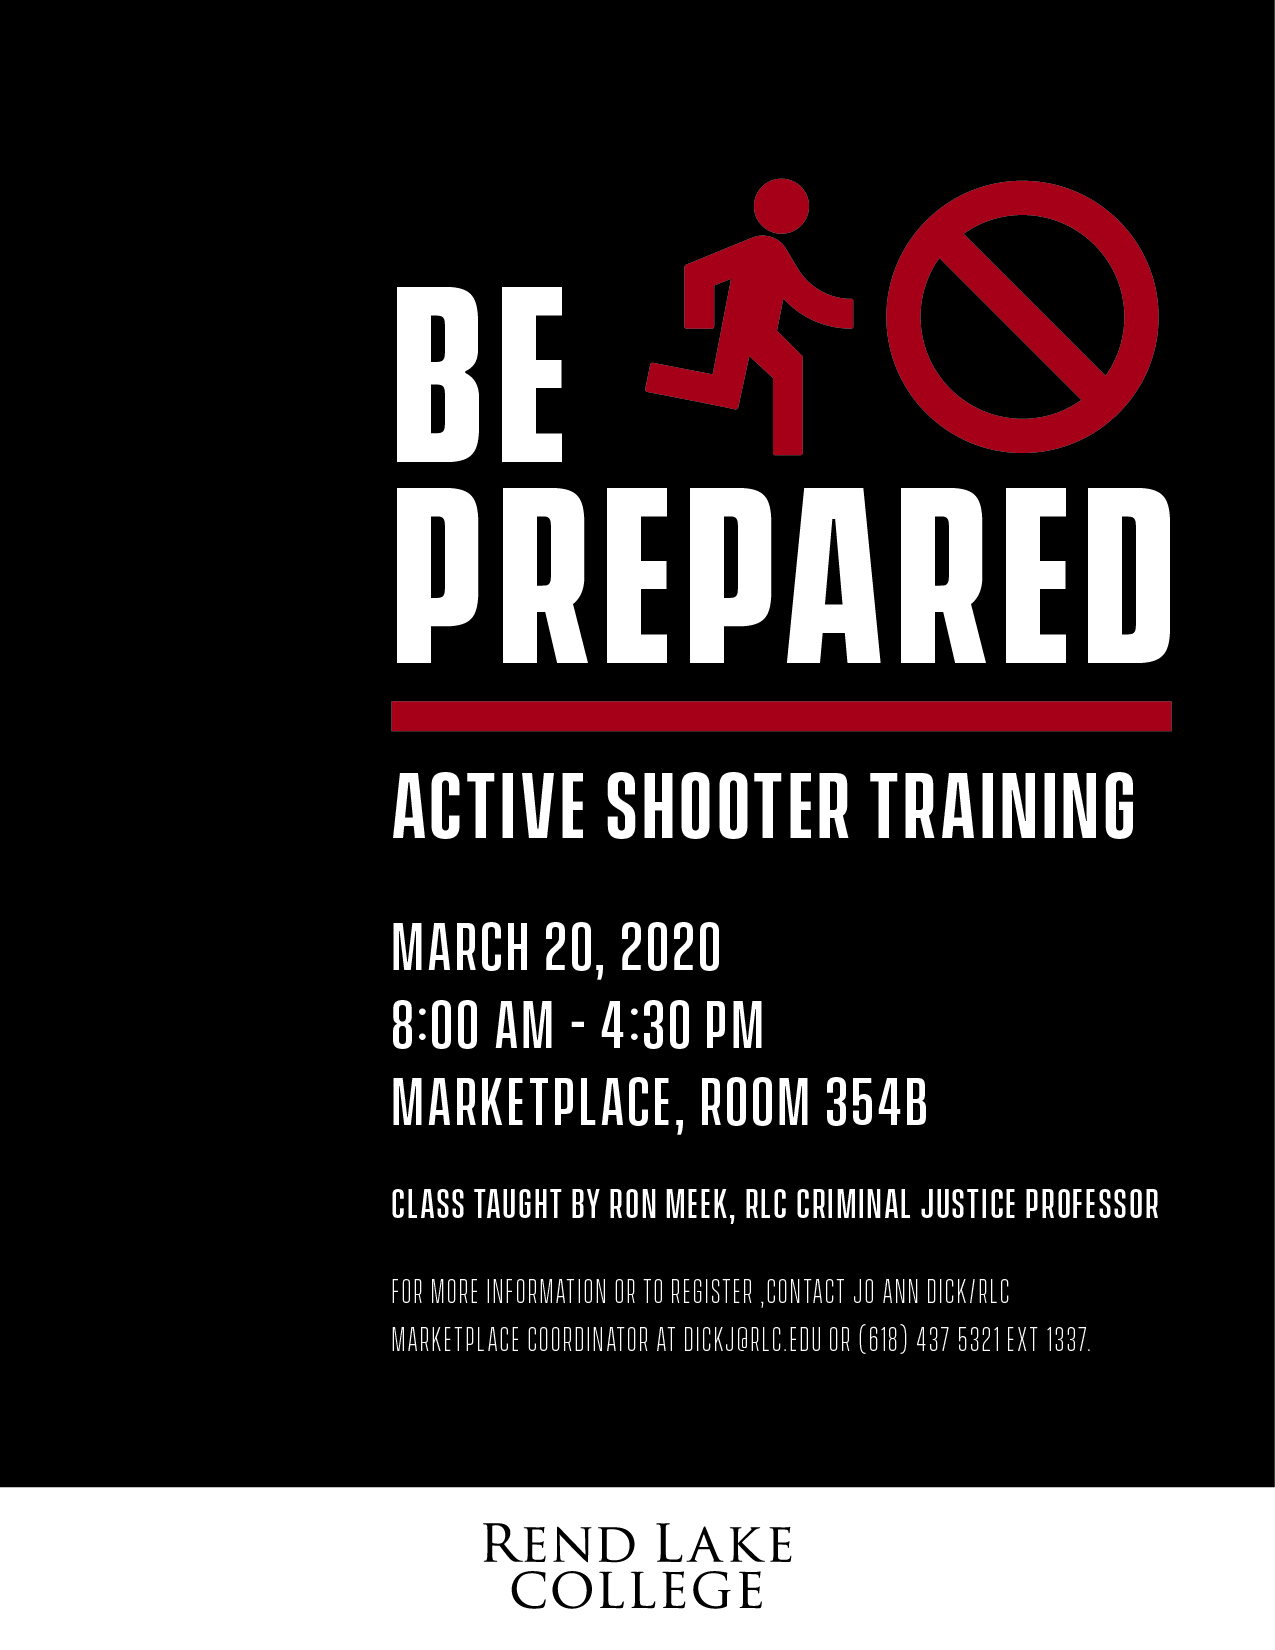 Active Shooter Training Flyer 01